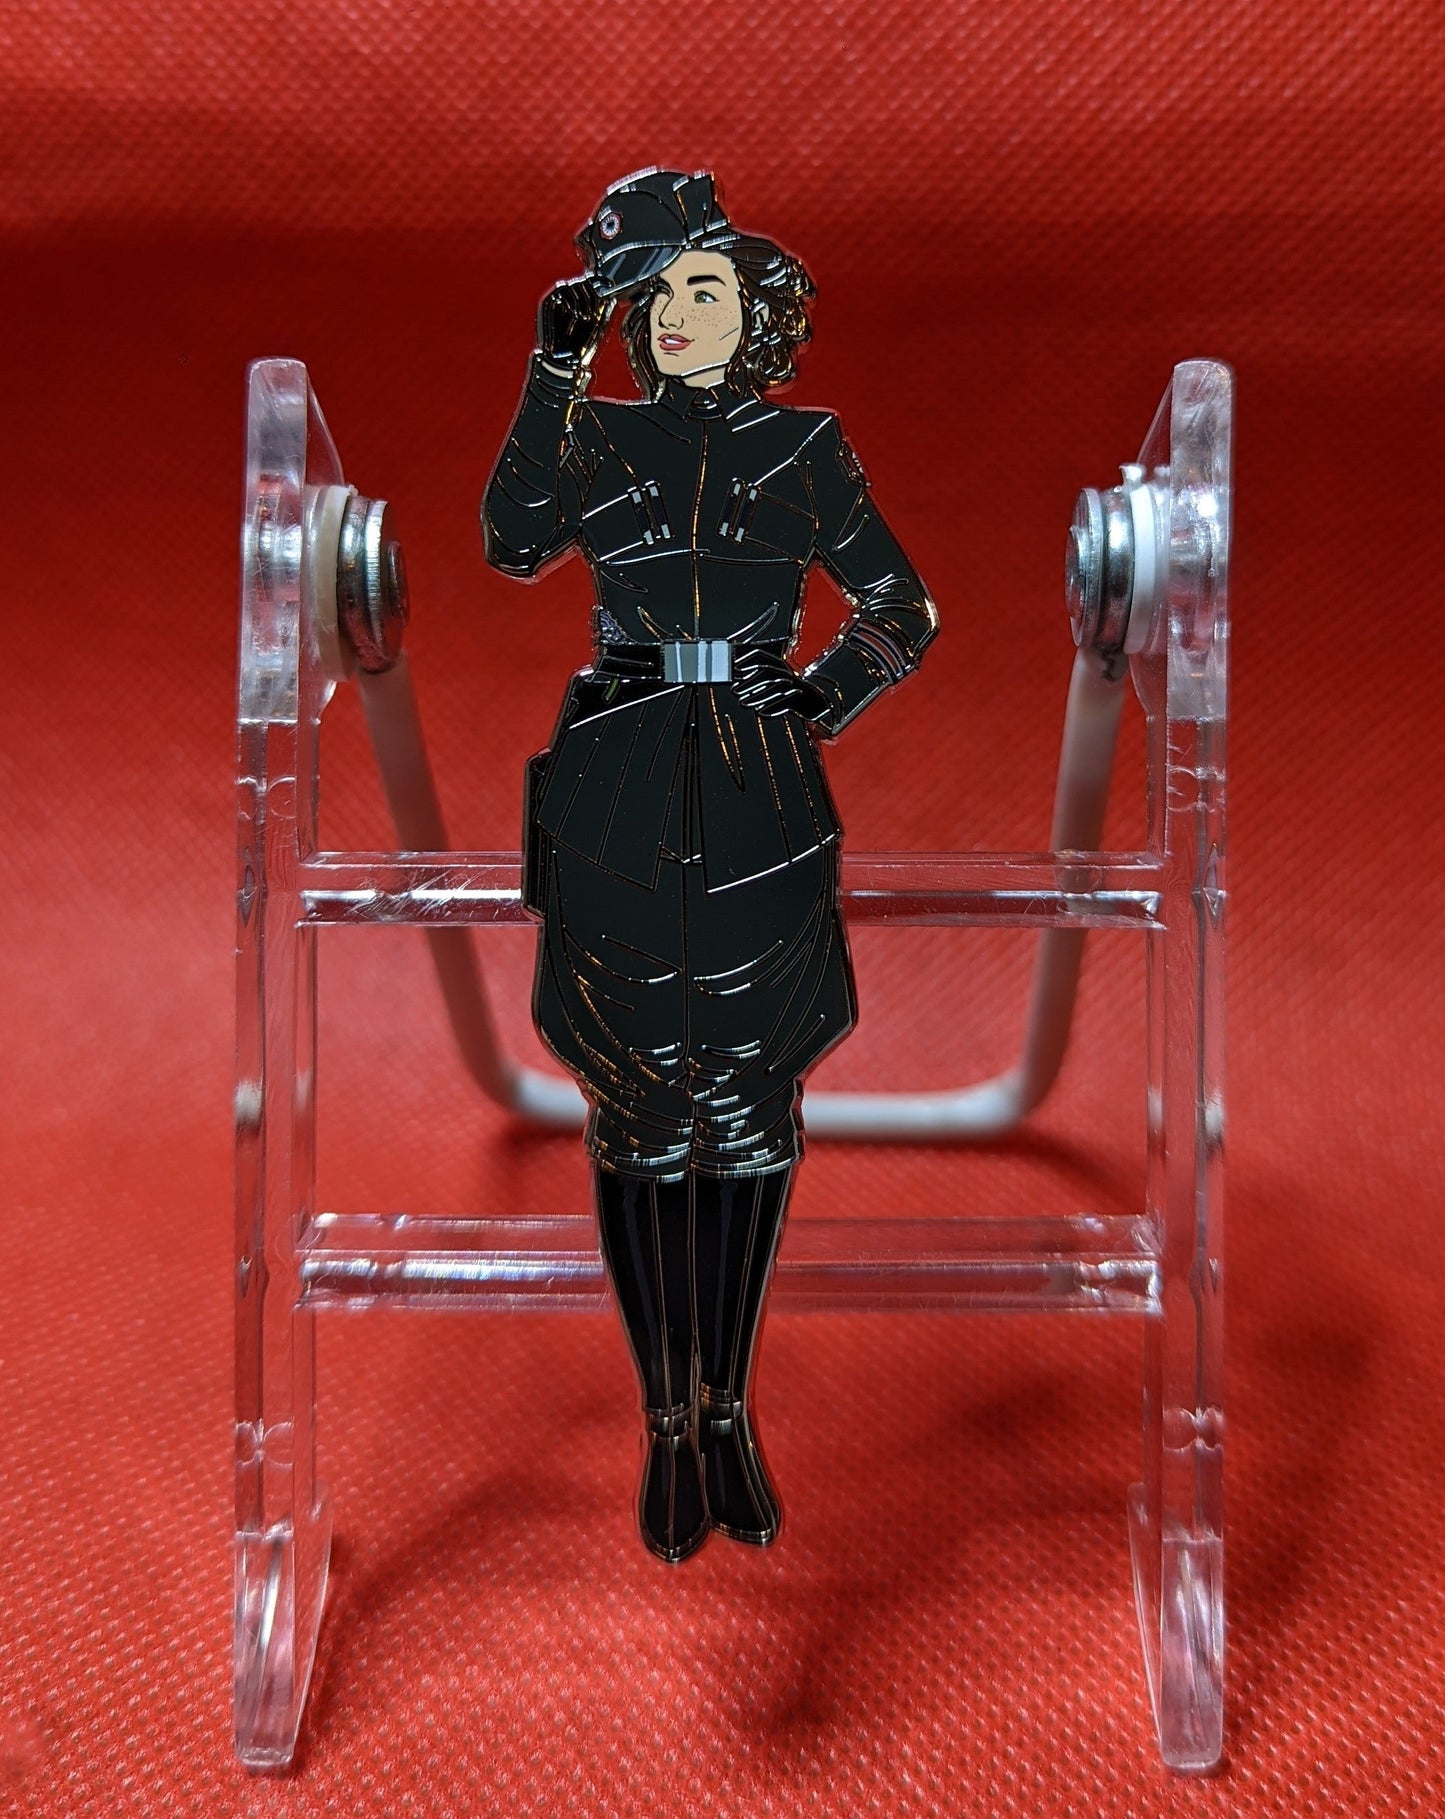 Our favorite scavenger in a full FO officer outfit, tipping her hat. Pin is 3.75 inches tall.